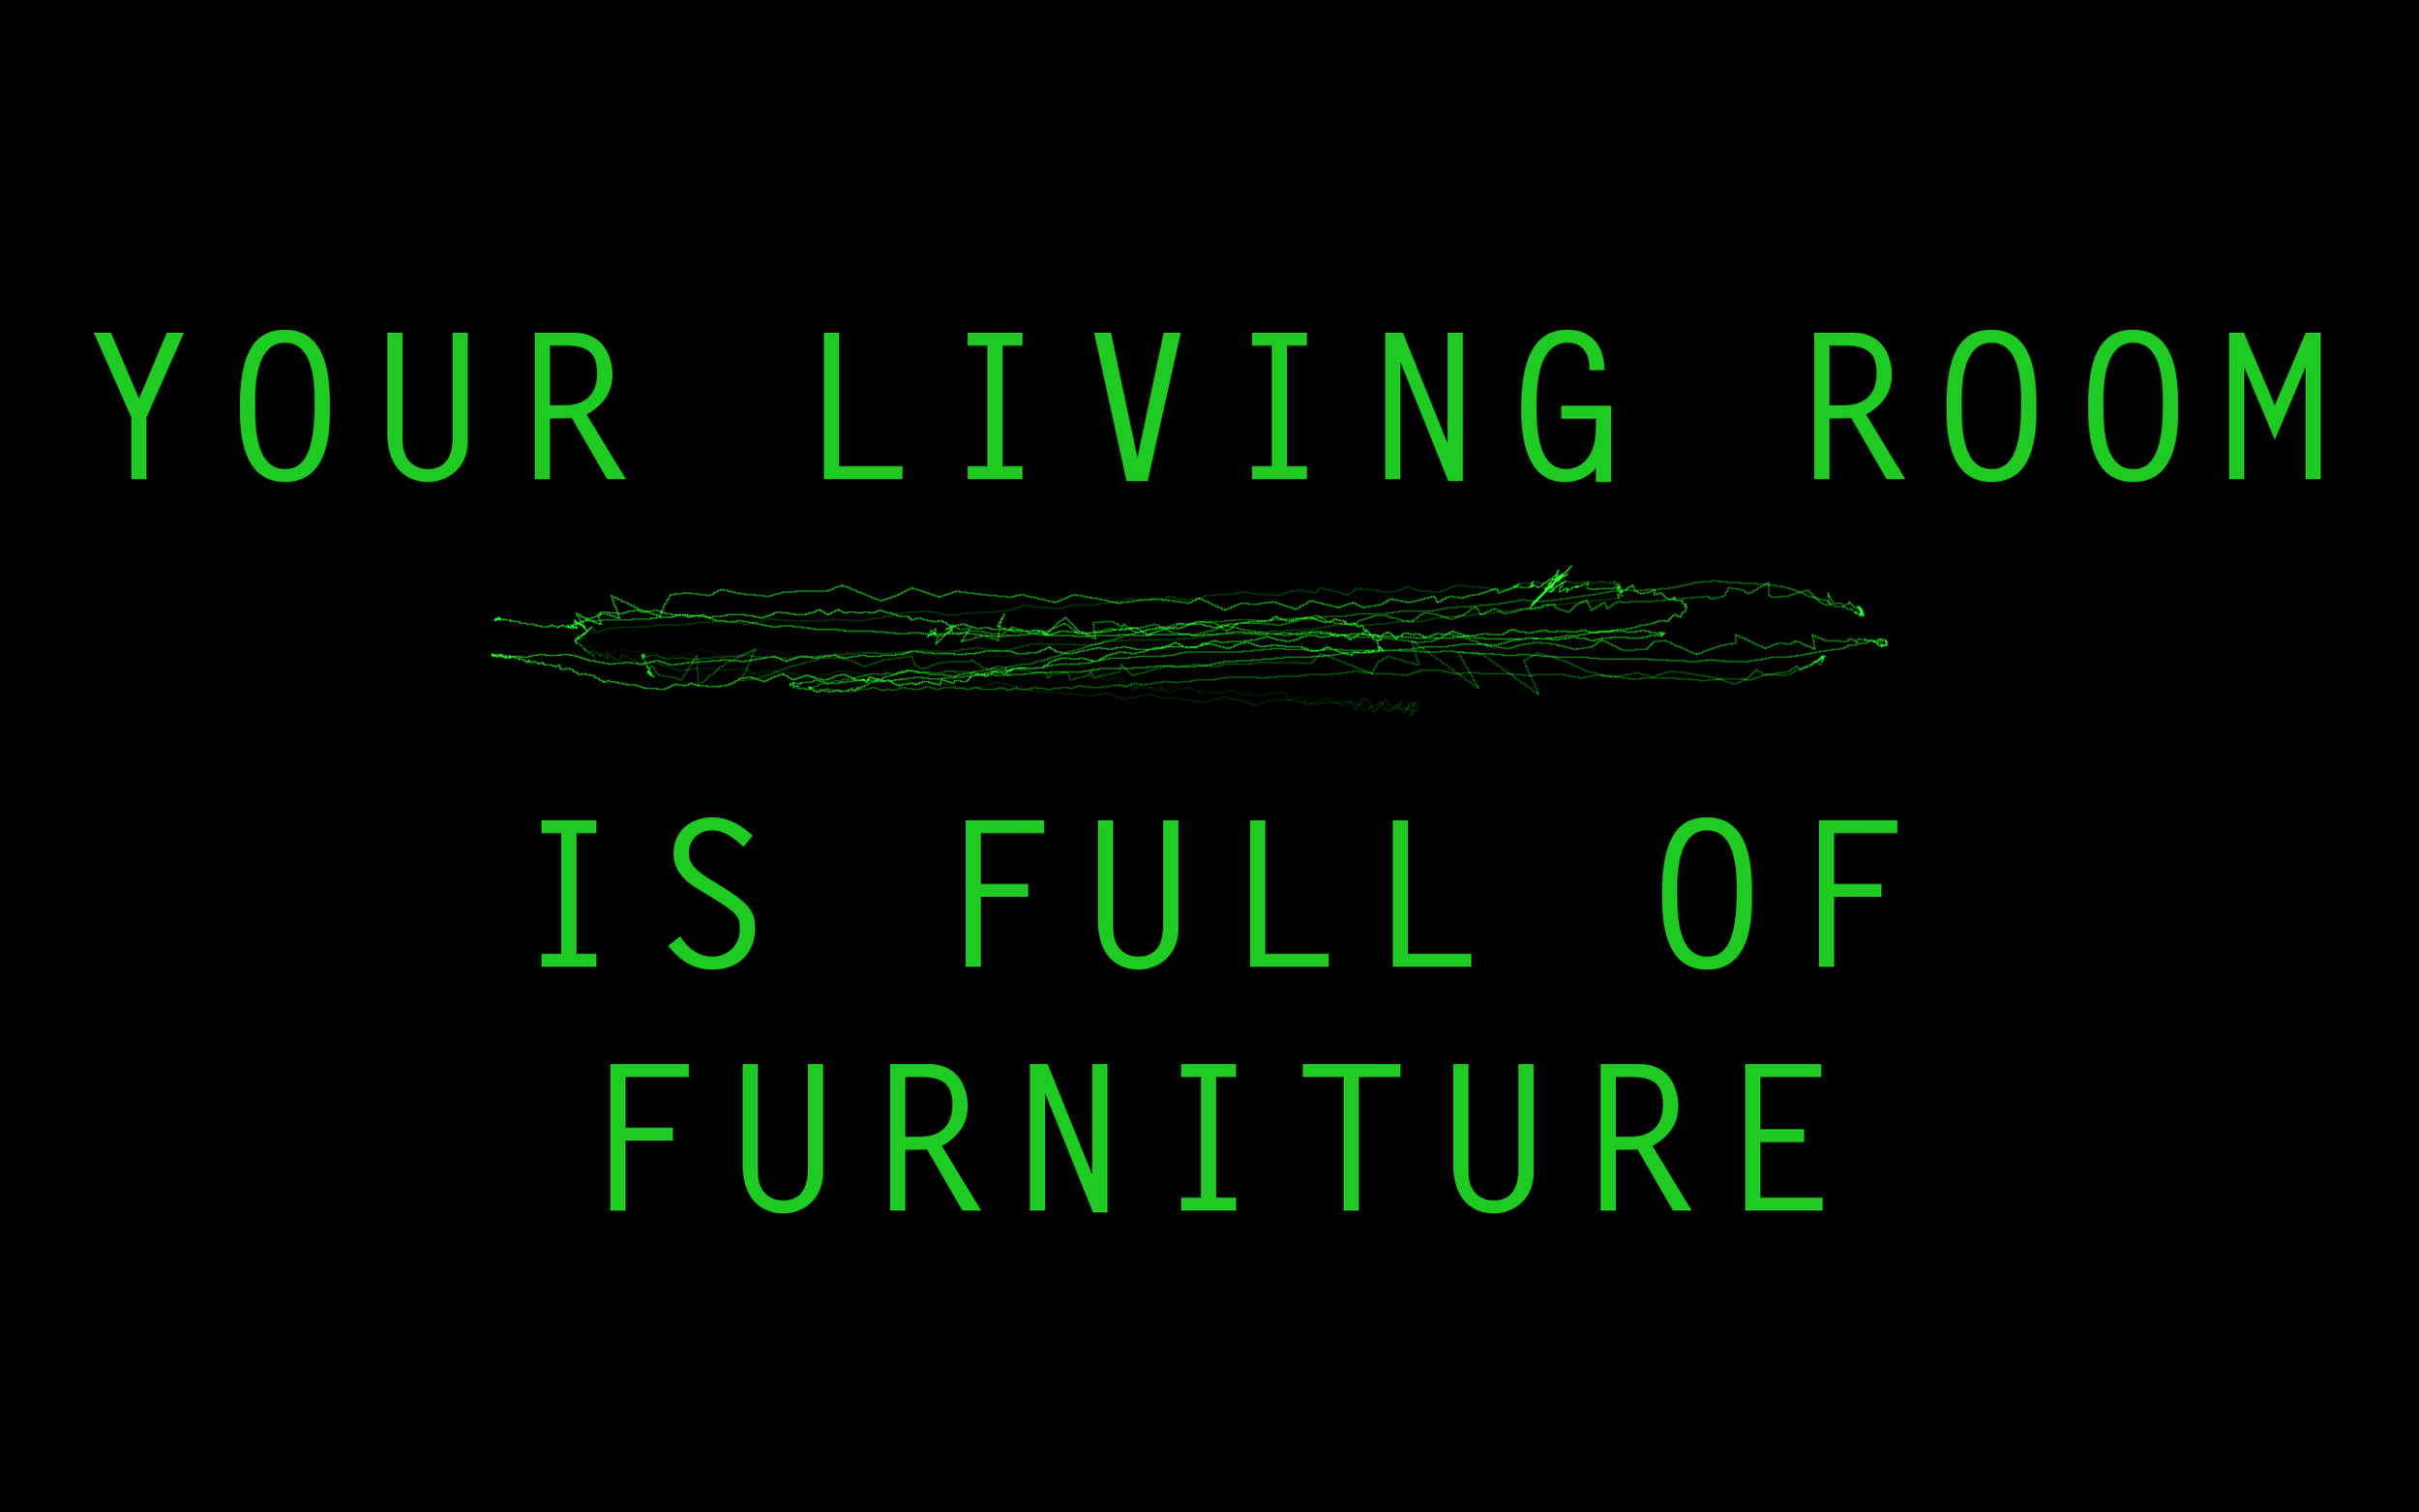 Your Living Room is Full of Furniture